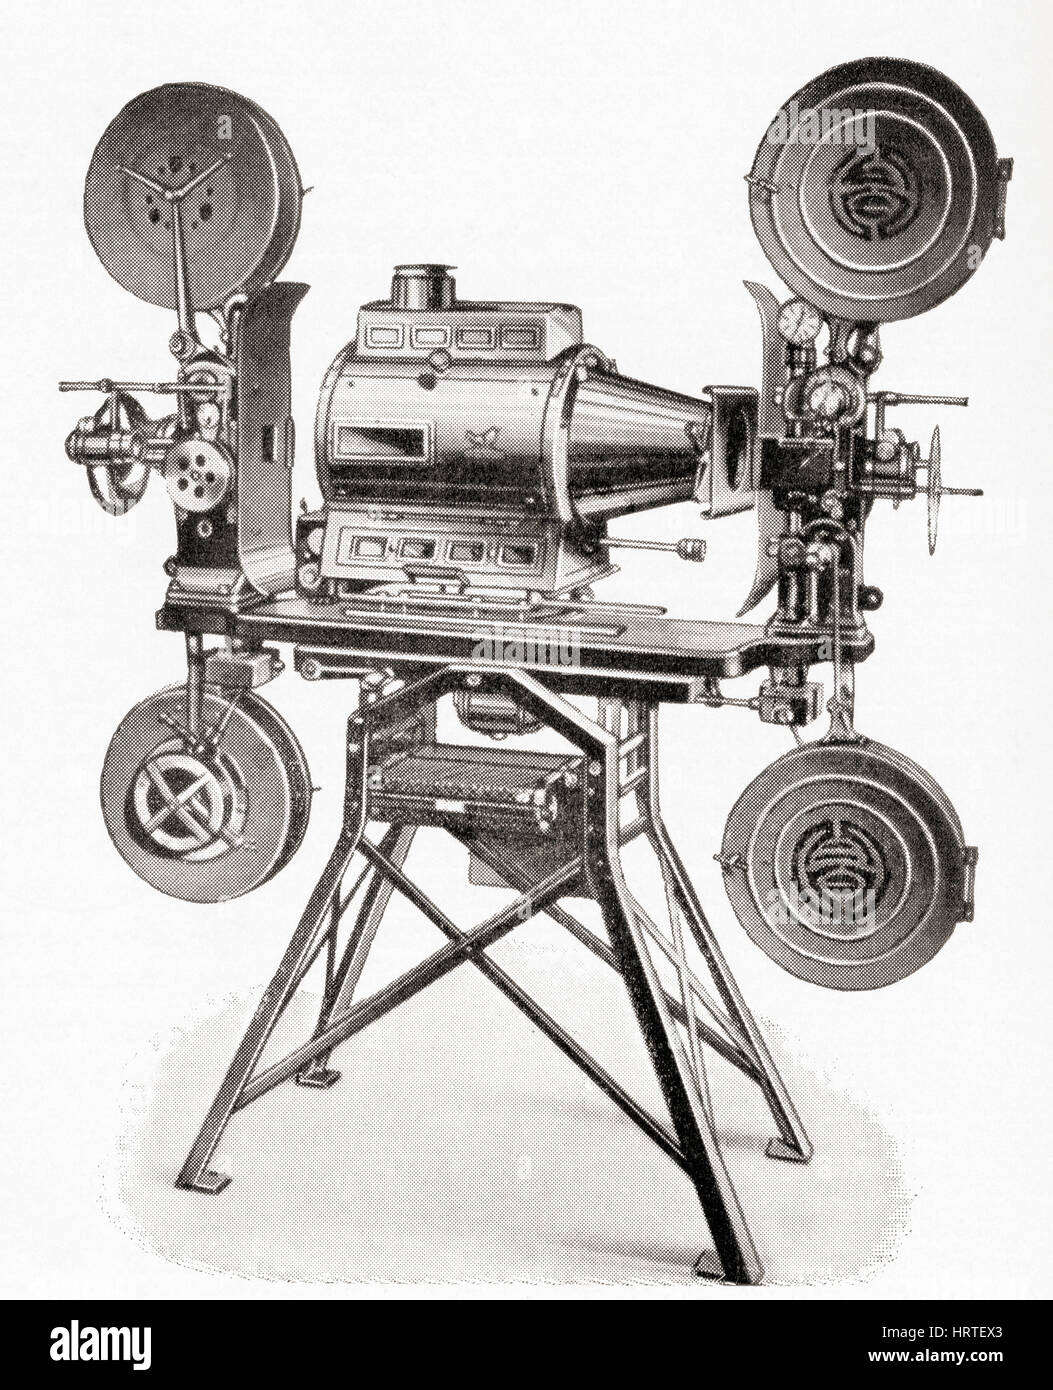 A Hahn Goerz twin projection movie camera.  From Meyers Lexicon, published 1927. Stock Photo